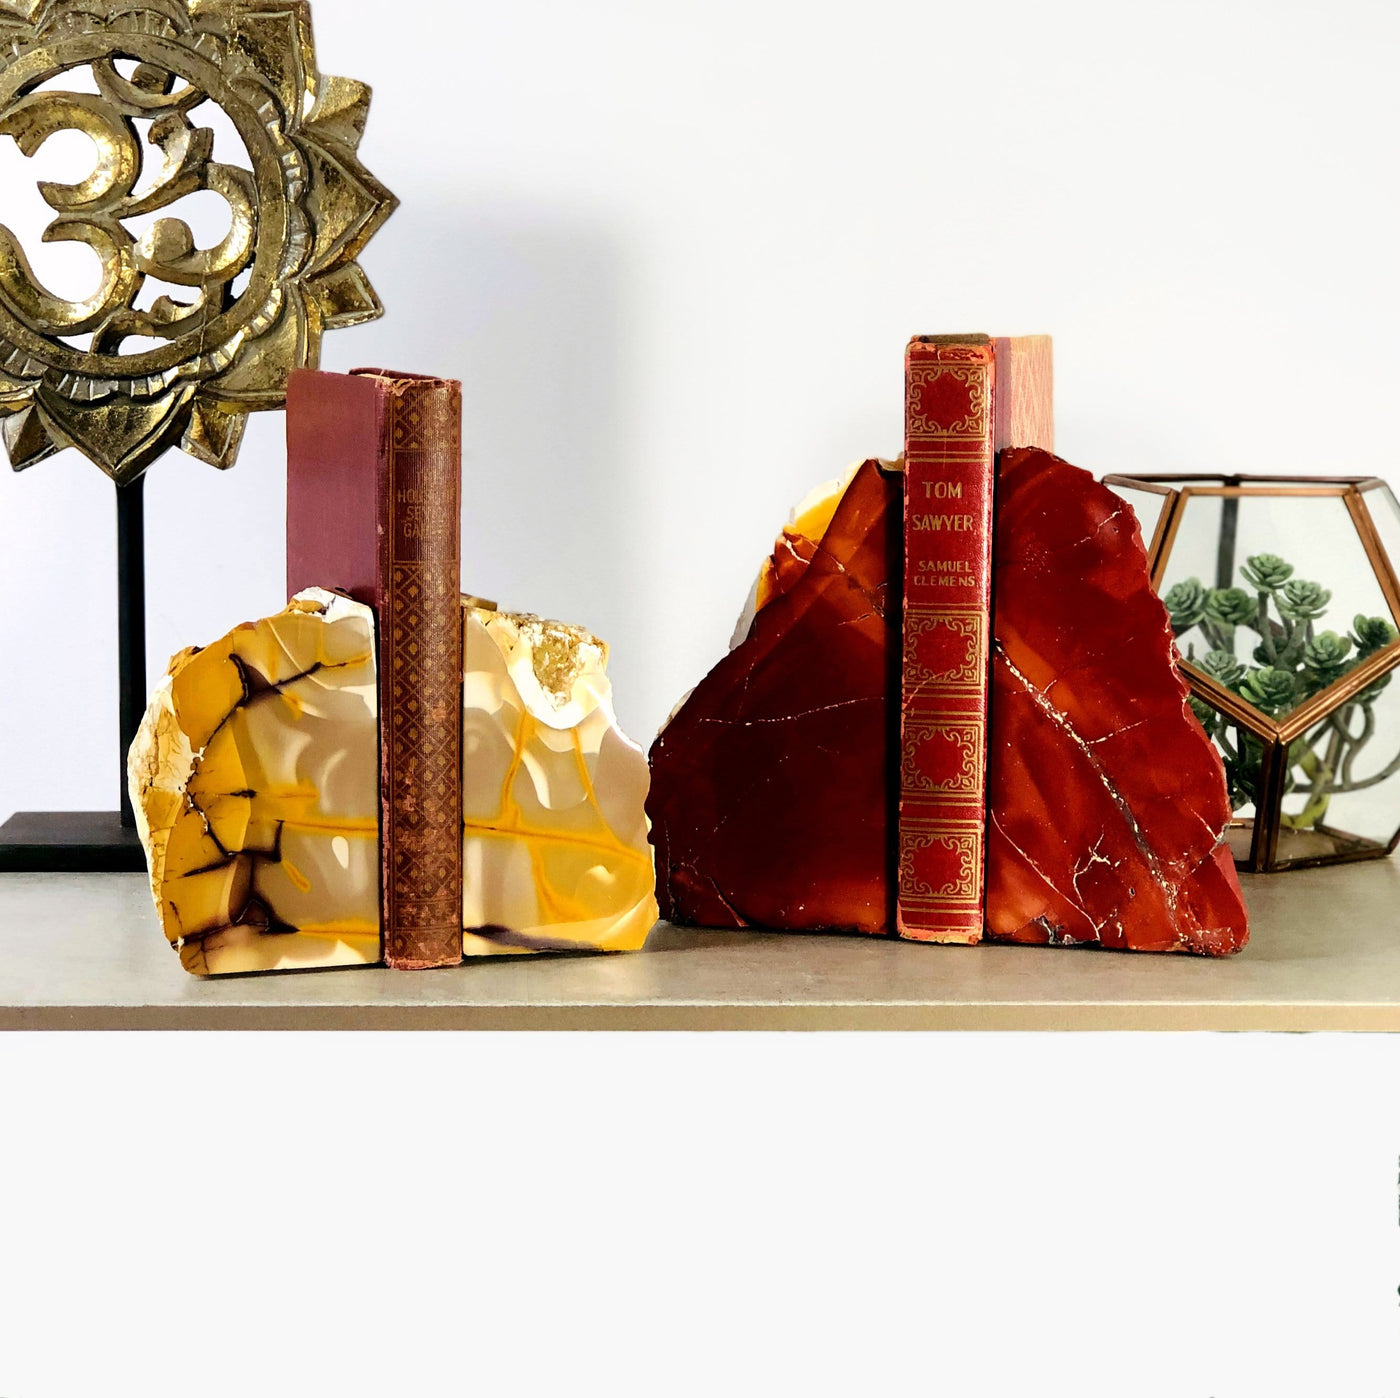 Mookaite Bookends displayed to show color pattern differences in yellow tones and red tones